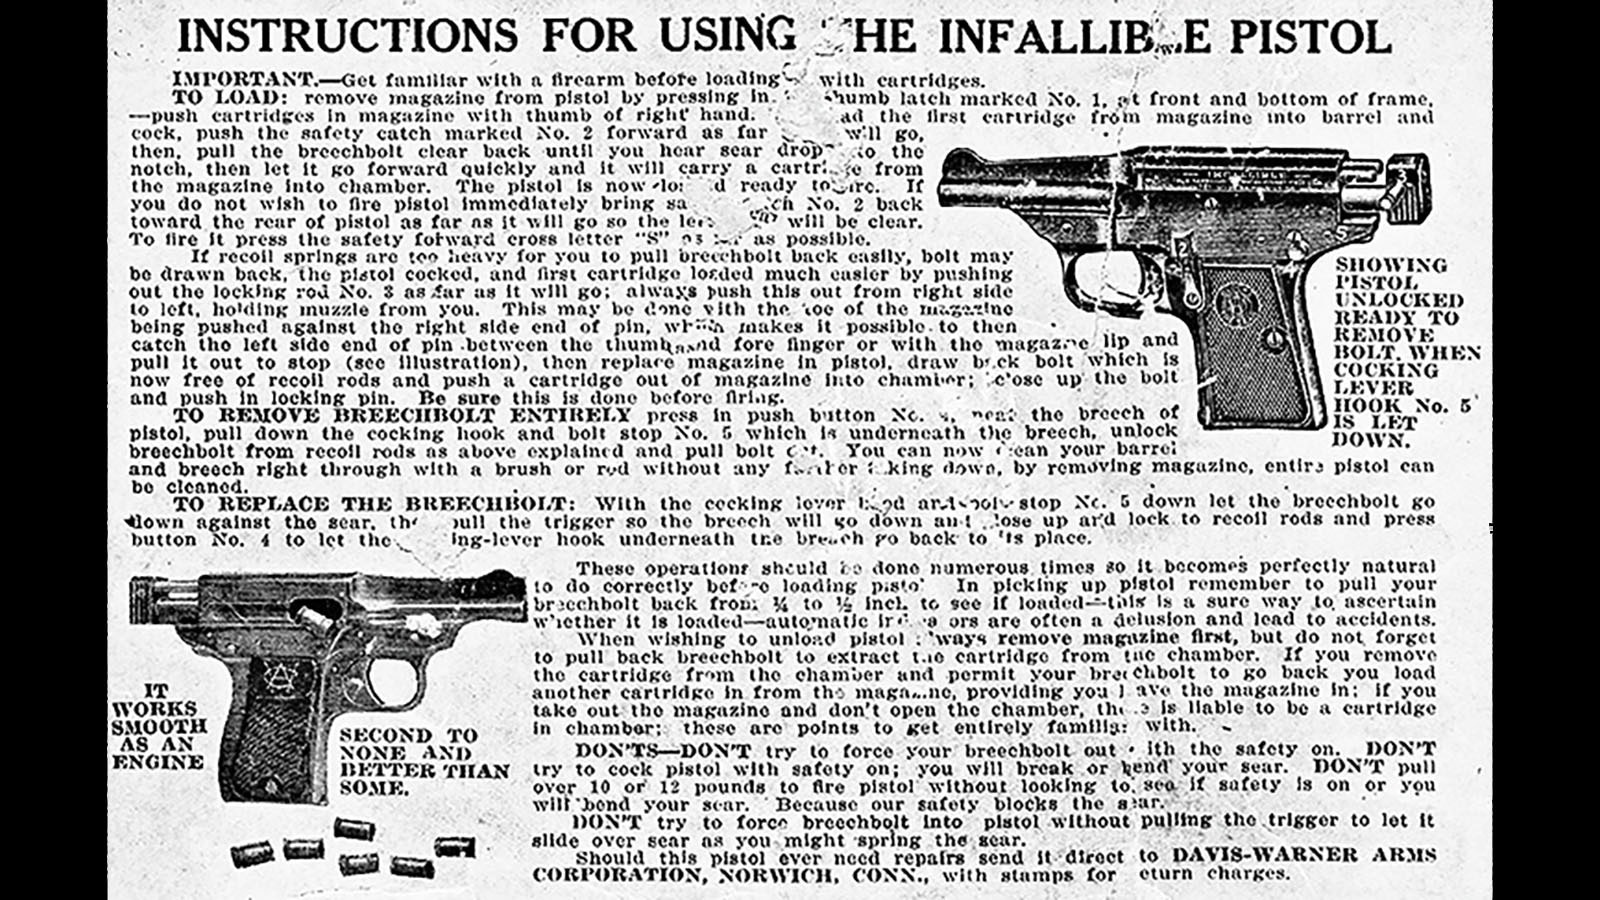 Vintage instructions for using the Warner Infallible pistol.